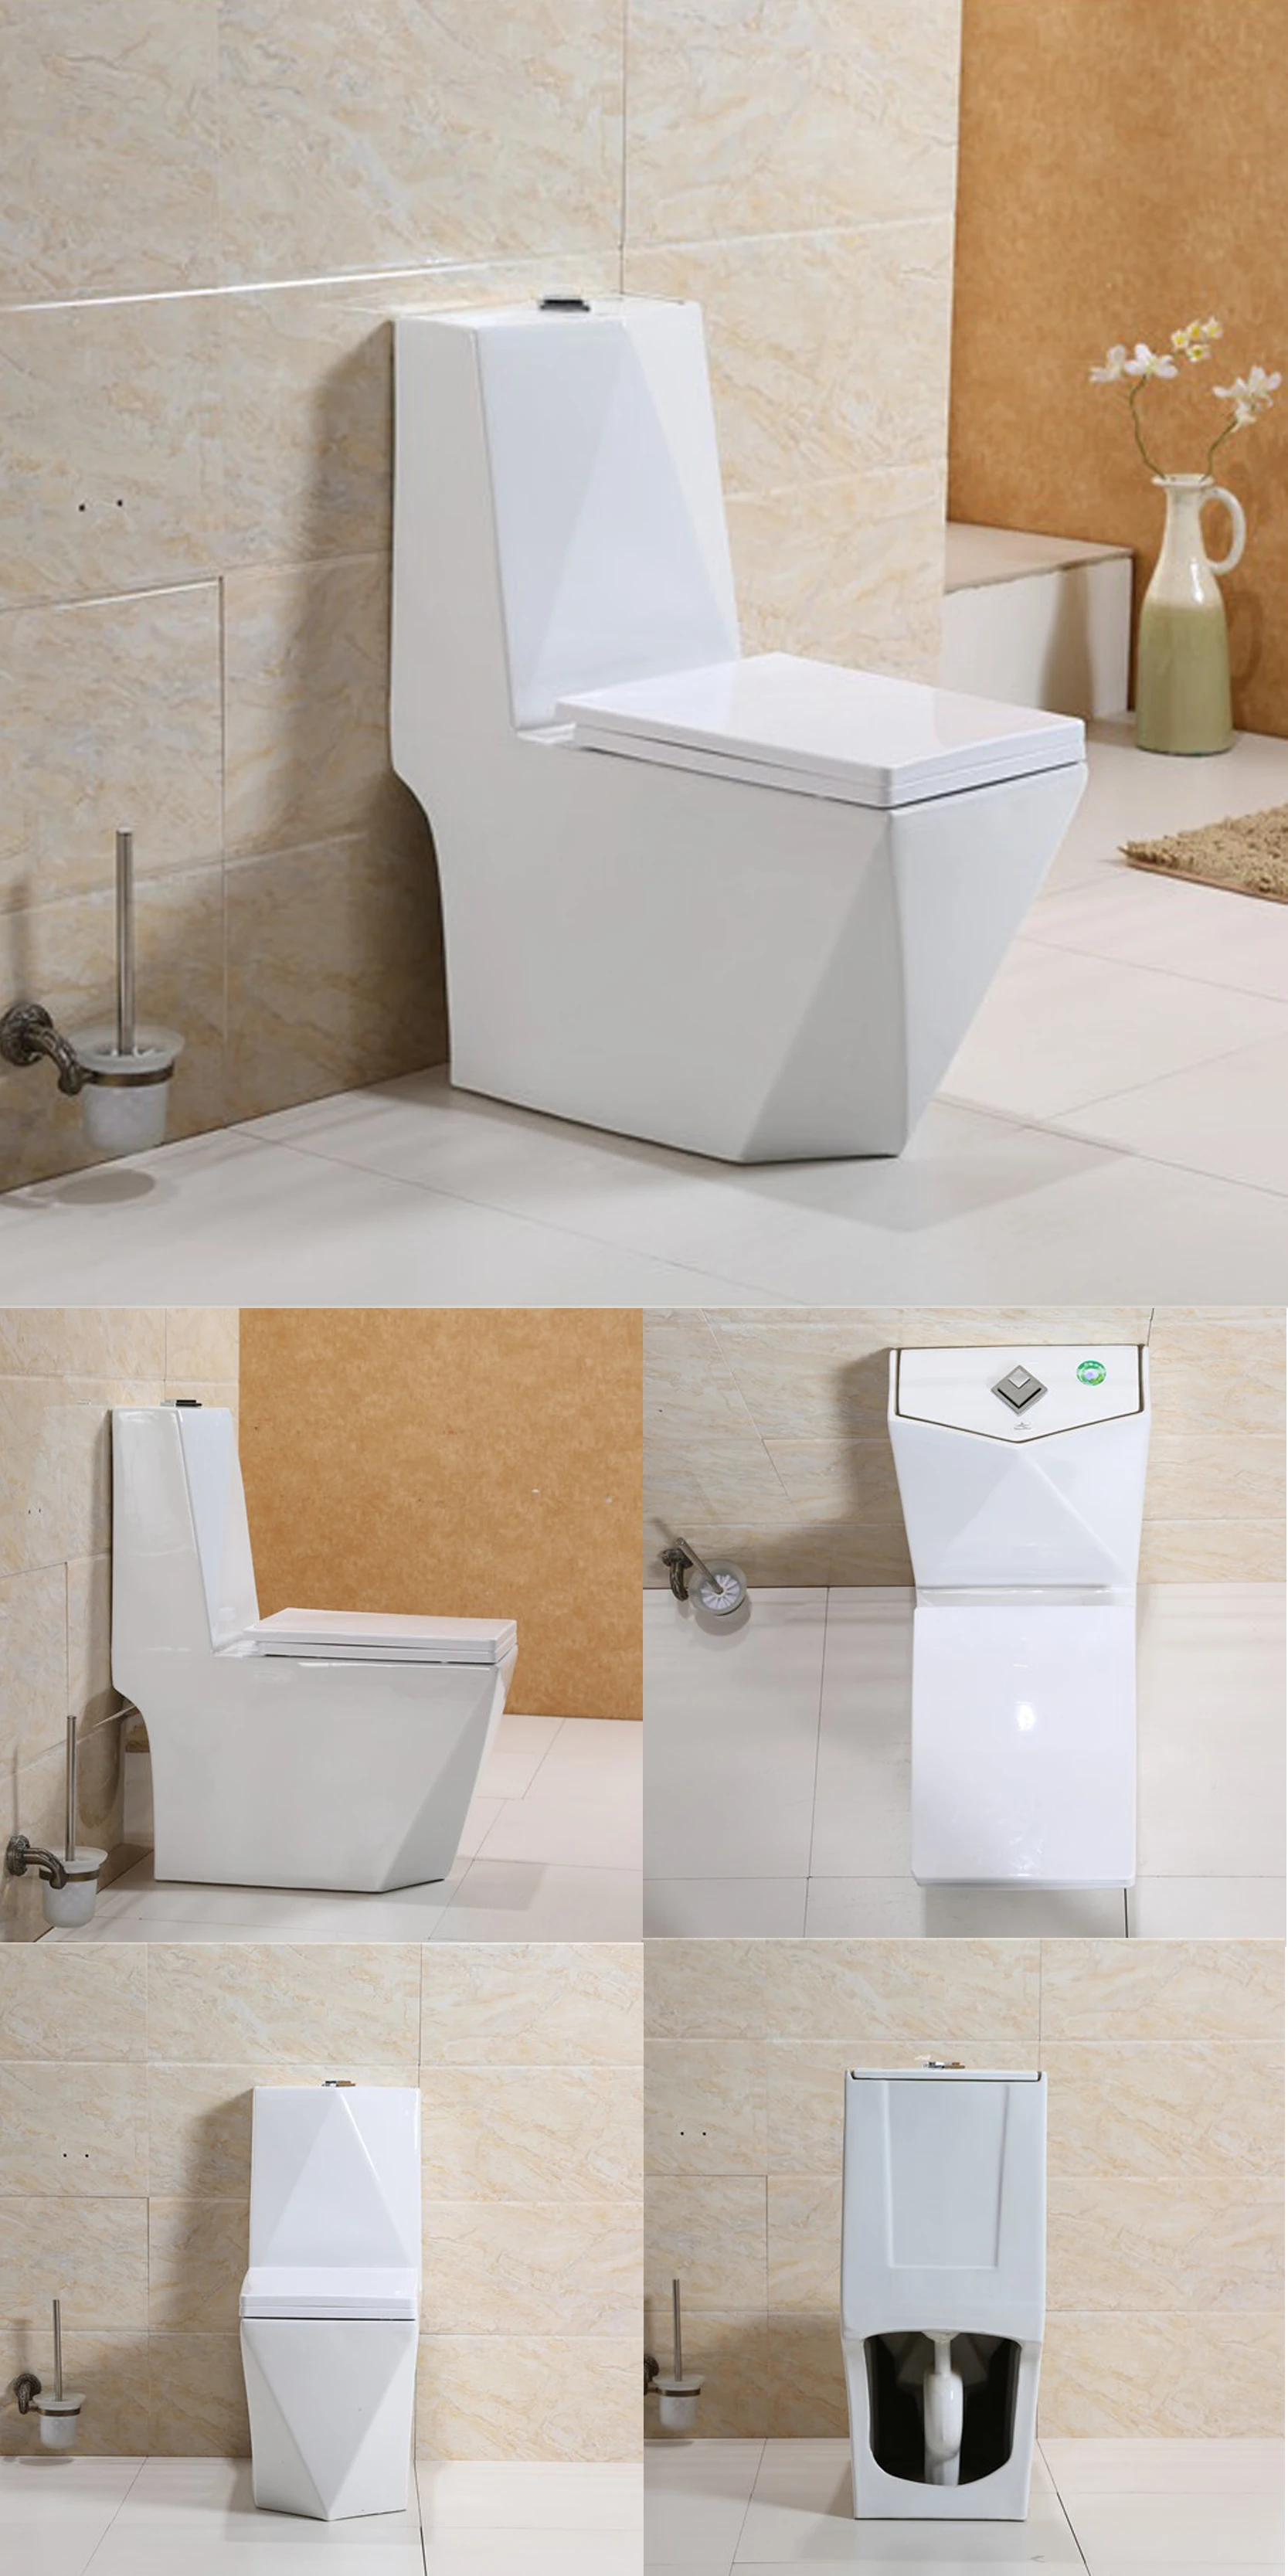 JOININ chaozhou  Bathroom equipment Ceramic square one Piece WC Toilet JY1017